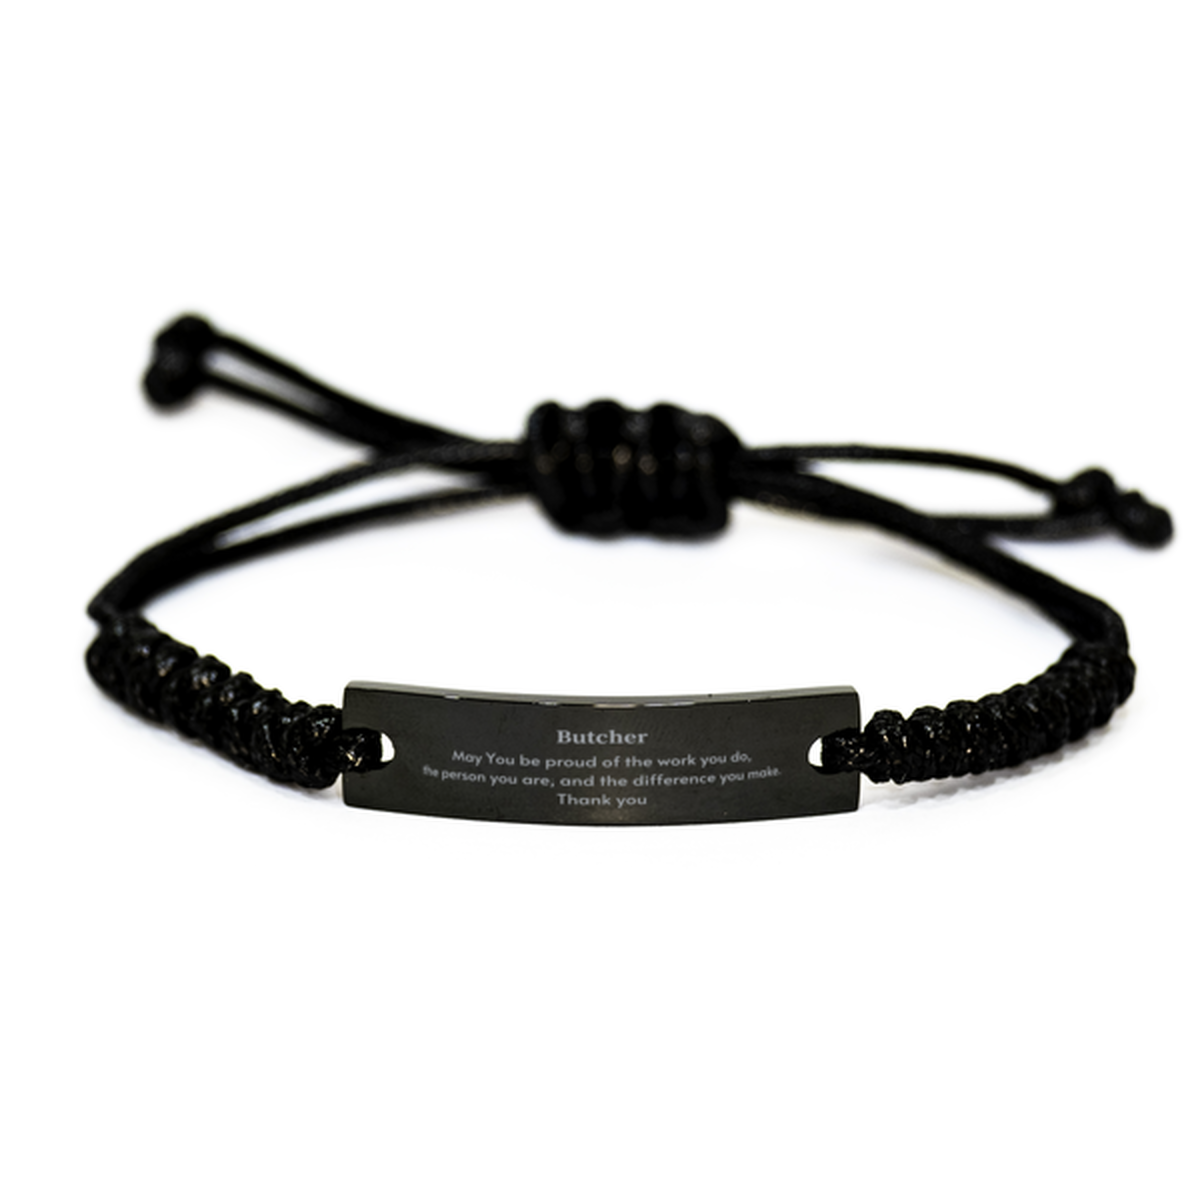 Heartwarming Black Rope Bracelet Retirement Coworkers Gifts for Butcher, Butcher May You be proud of the work you do, the person you are Gifts for Boss Men Women Friends